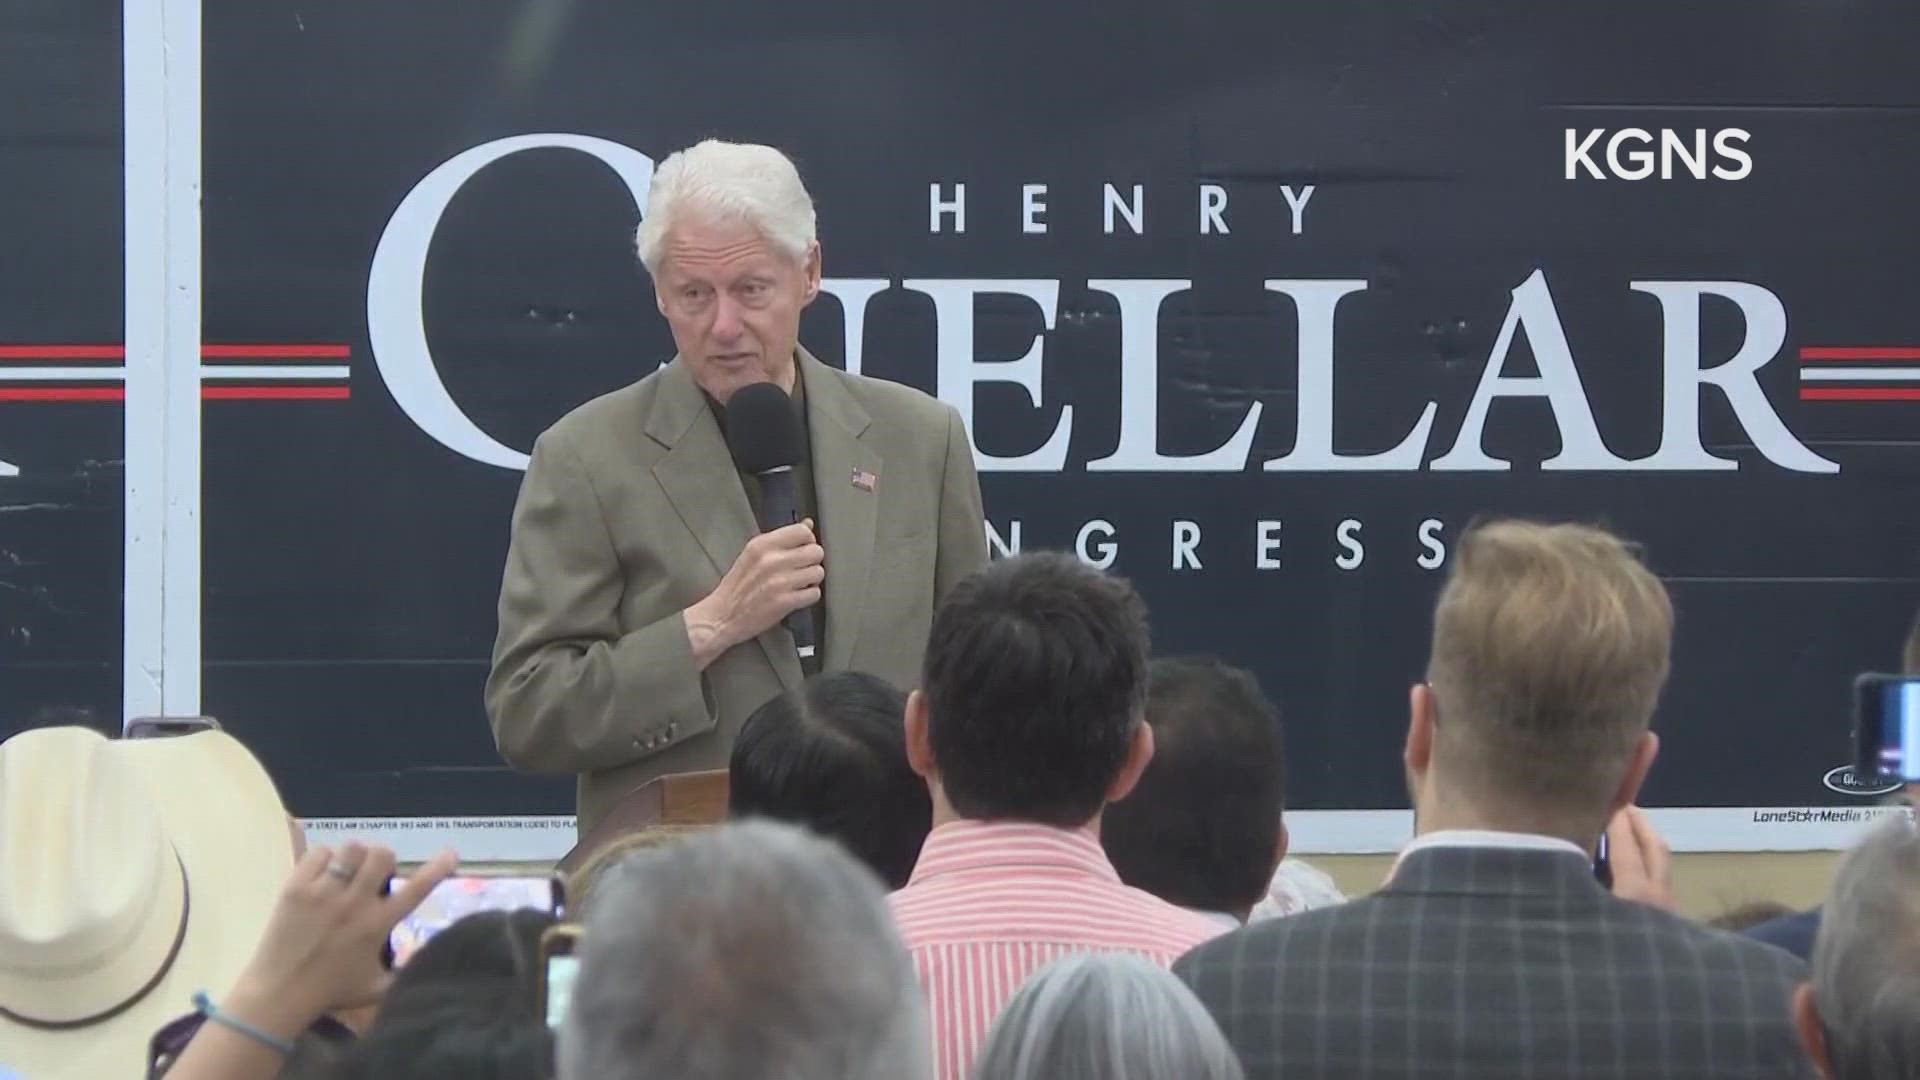 Clinton spoke about Cuellar's track record and met with families of Uvalde victims.